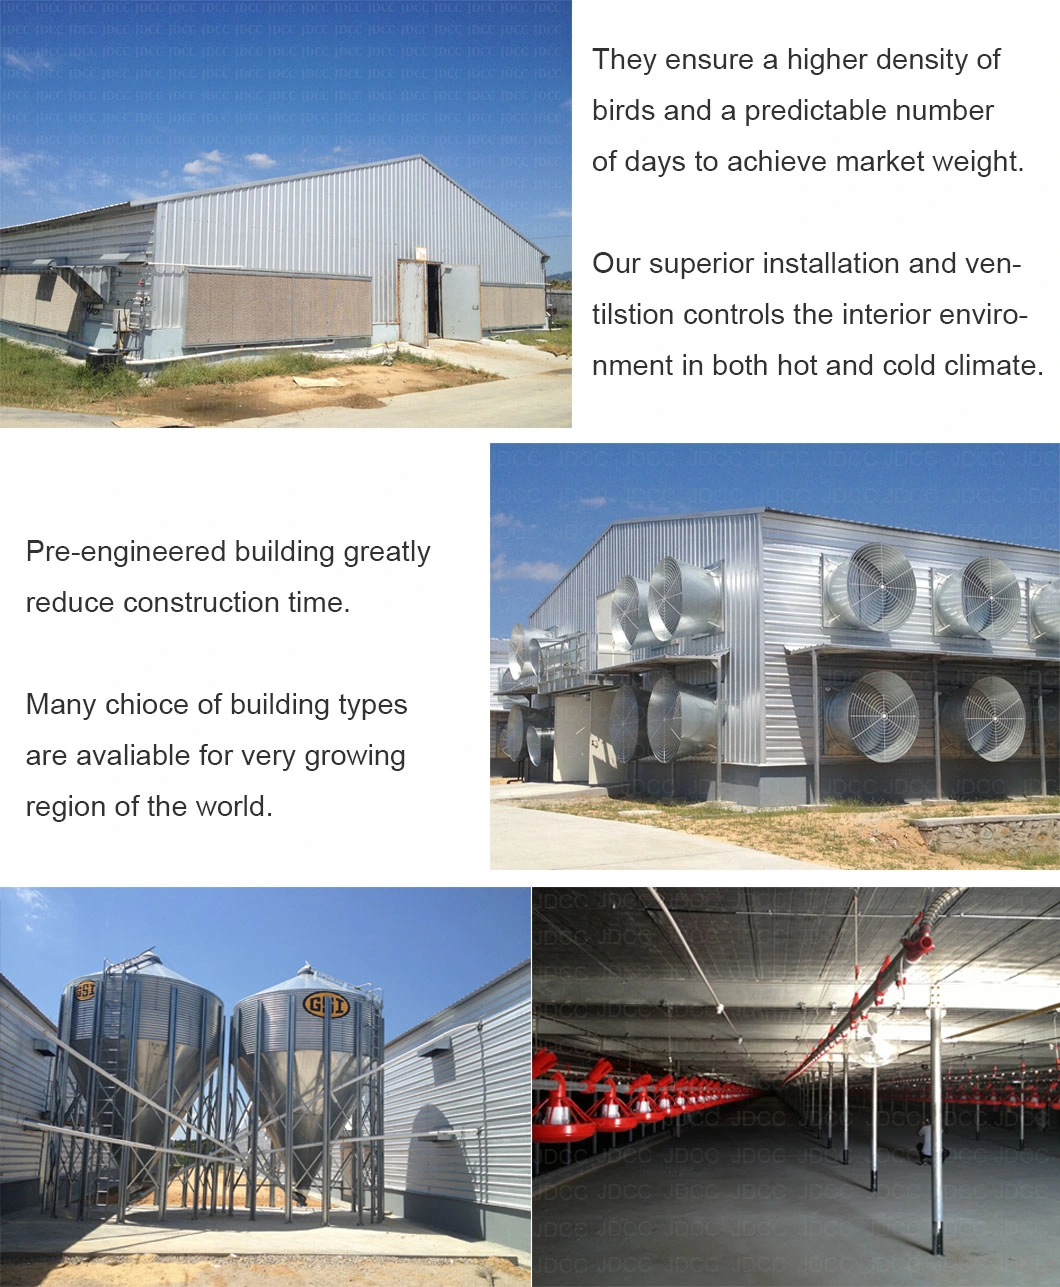 Quality Assurance Galvanized Steel Structure Design Chicken Cage Poultry Shed Farms Hen Egg Layer Hen House Equipment Hen House Broiler House Chicken House